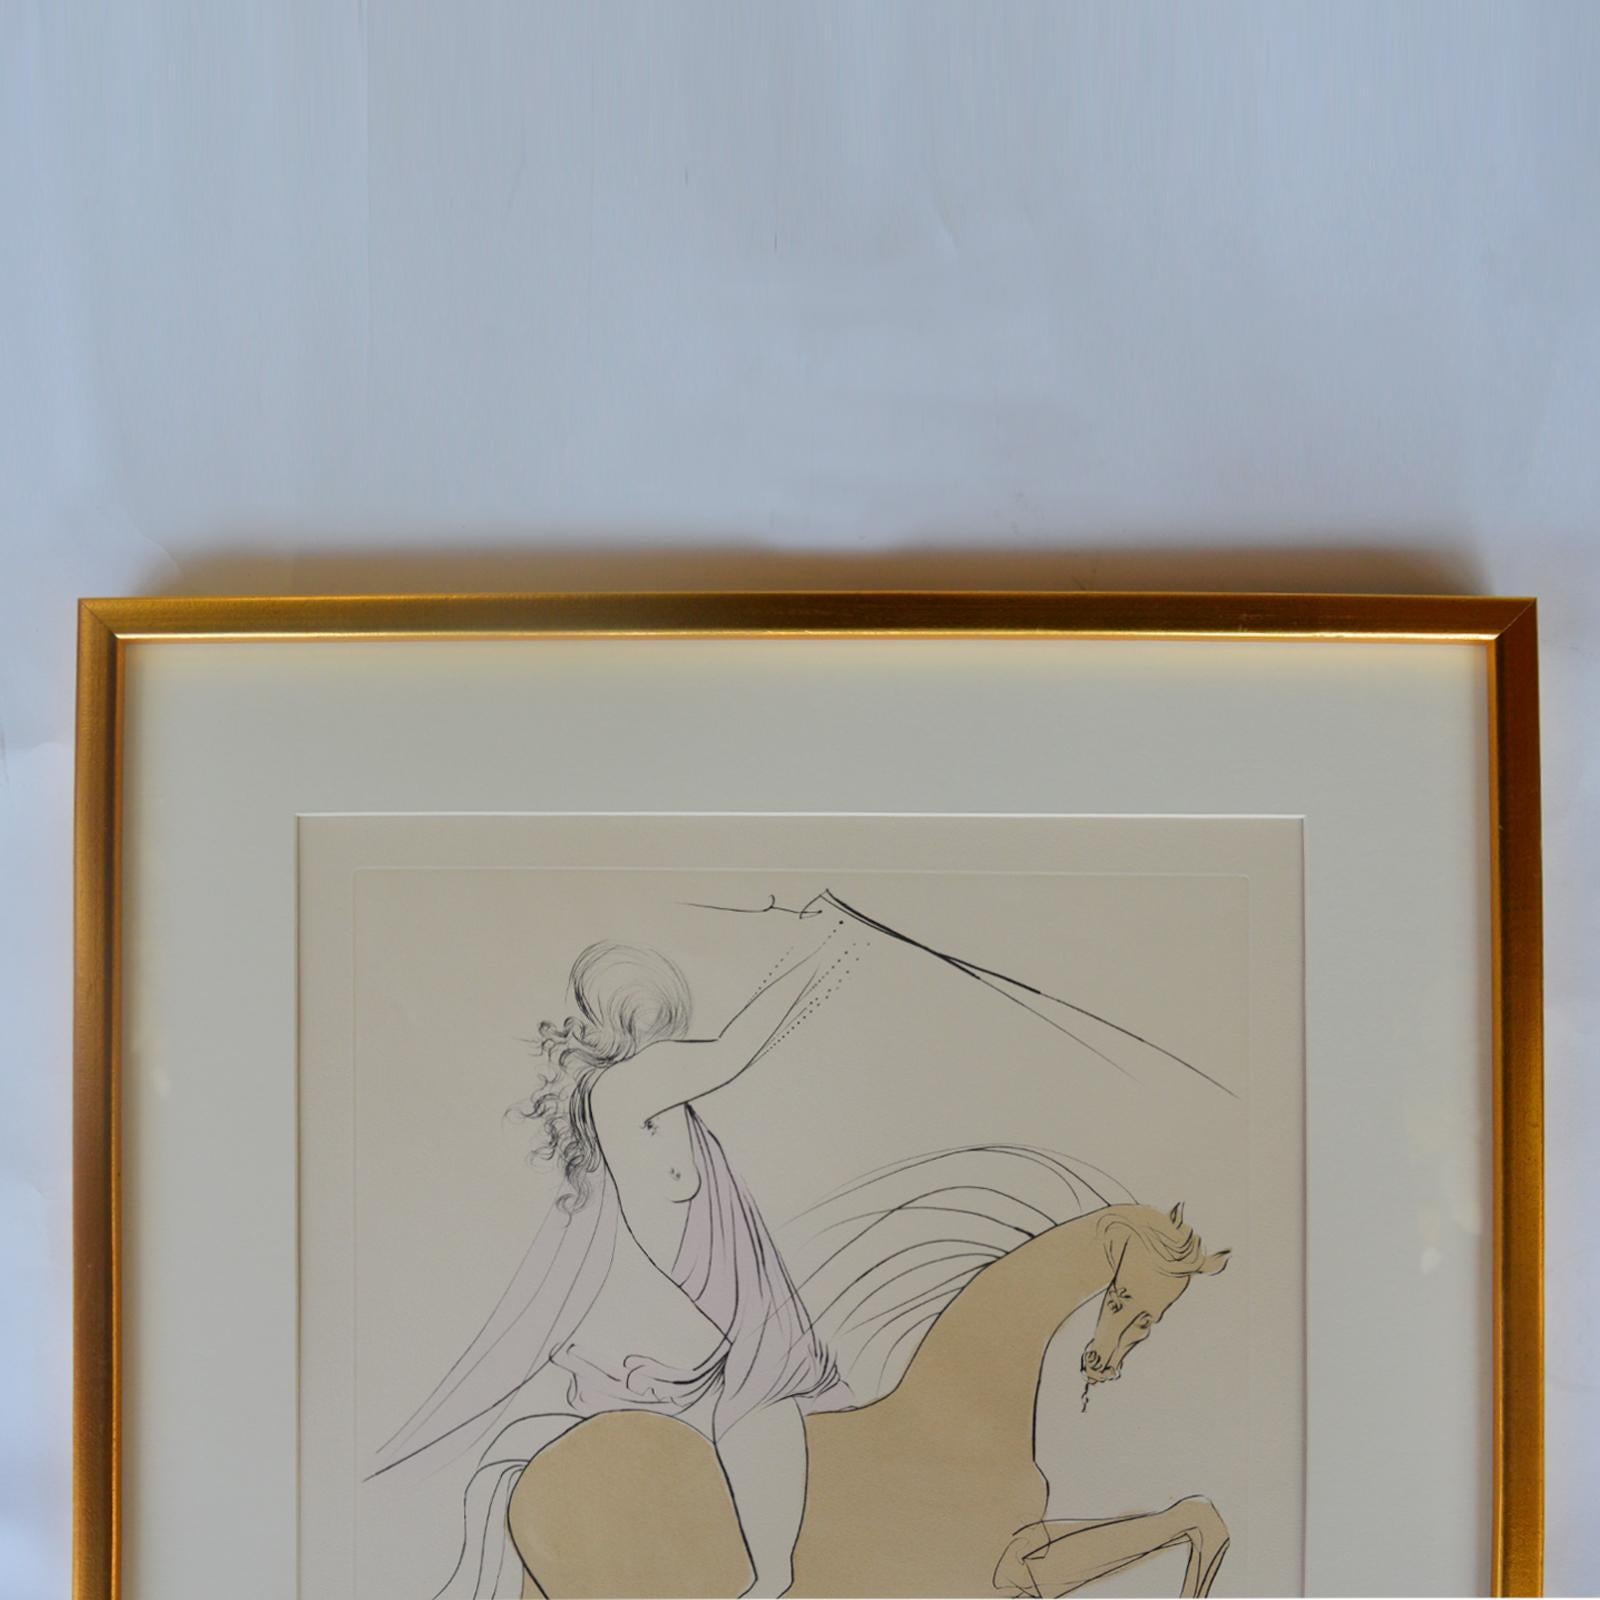 Spanish Pair  Salvador Dali 'sp. 1904-1984' Two Etchings on Papers “Amazon” & “Cavalier 